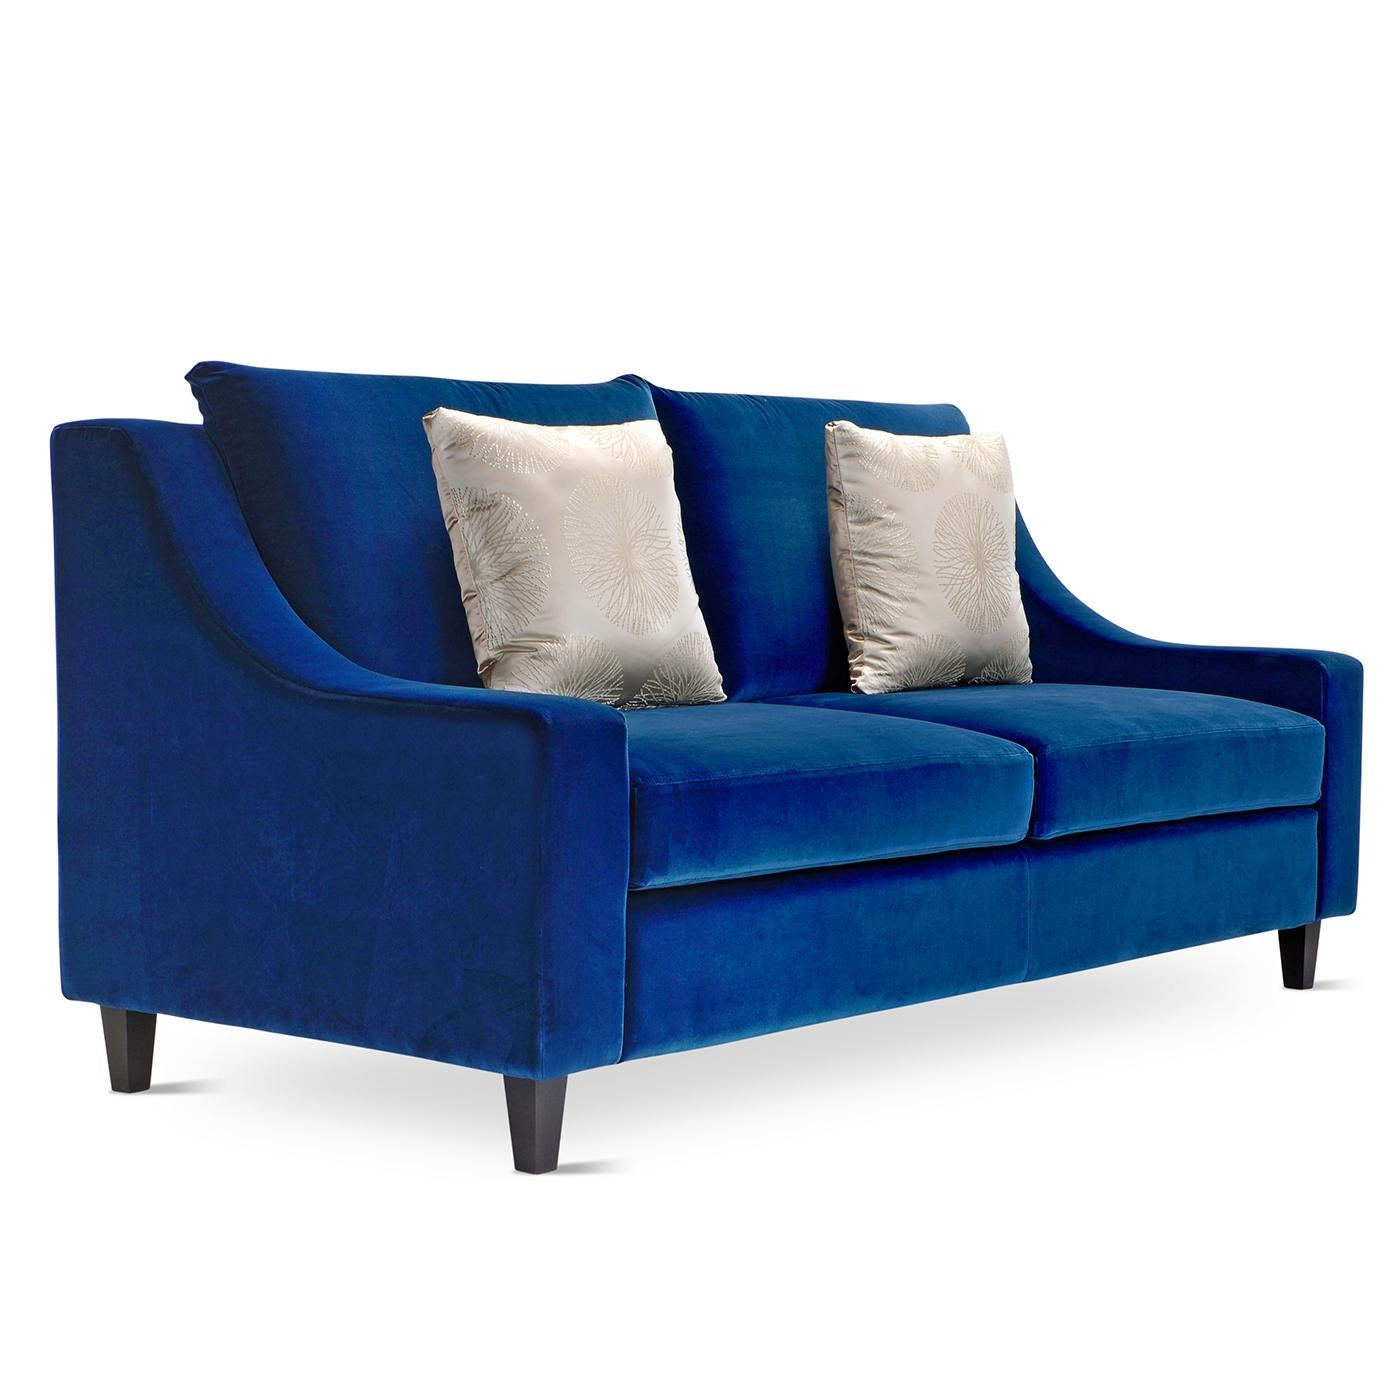 Marked by a vibrant cobalt blue Dacron upholstery and a classic silhouette, this sofa exudes comfort and style. The tapered armrests form a well-balanced unit with the platform base, while the multi-density polyurethane padding of seat and back